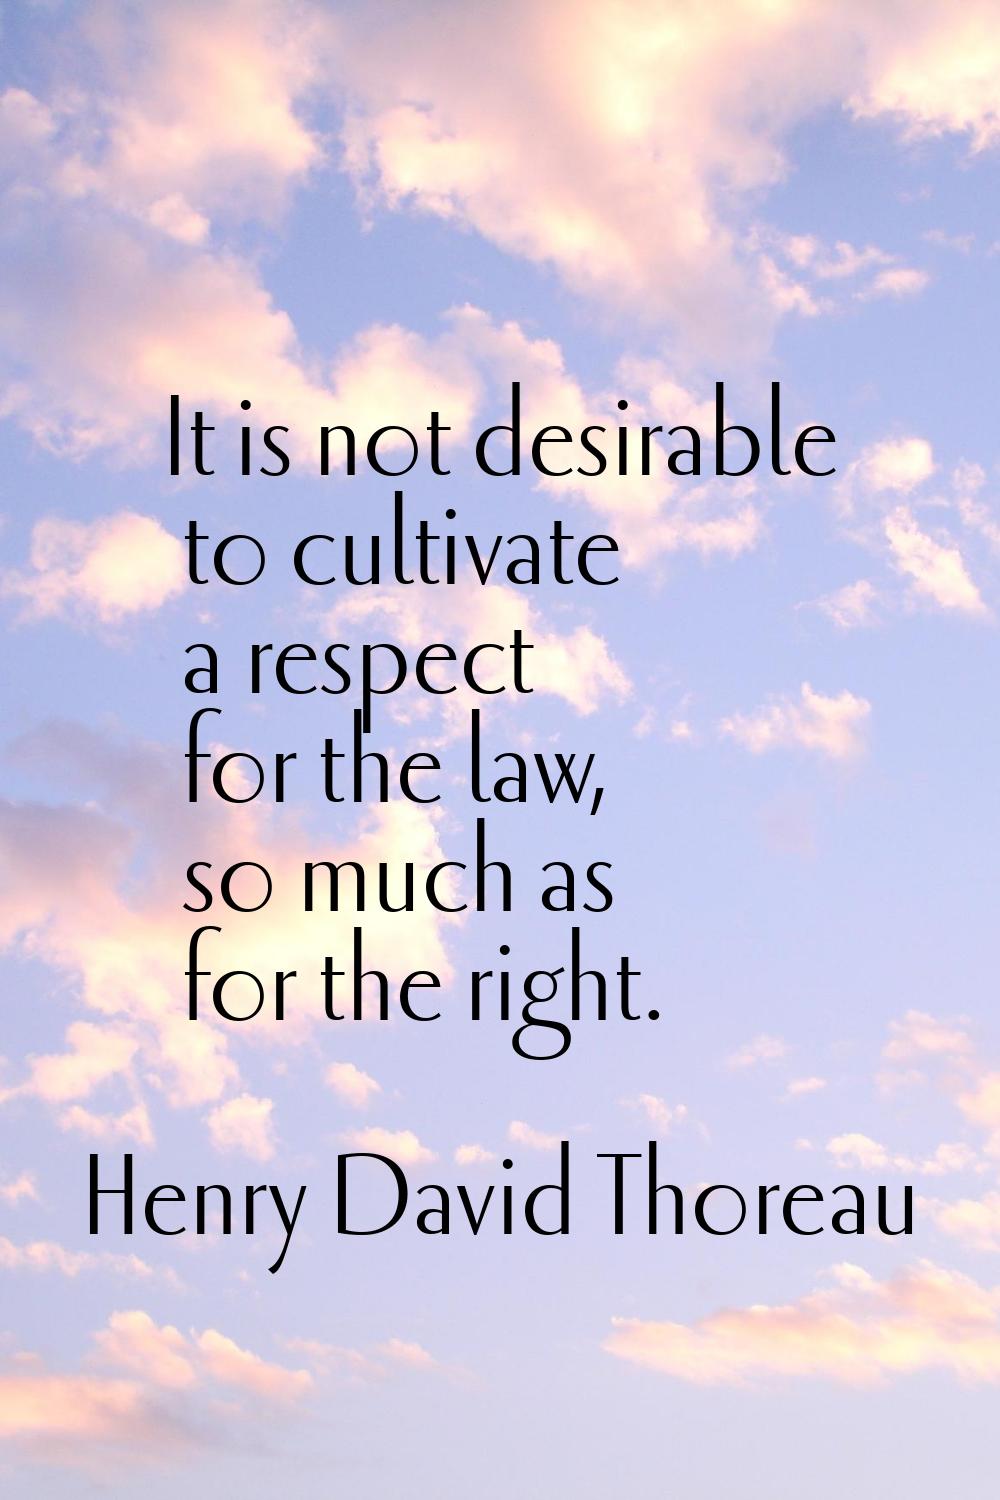 It is not desirable to cultivate a respect for the law, so much as for the right.